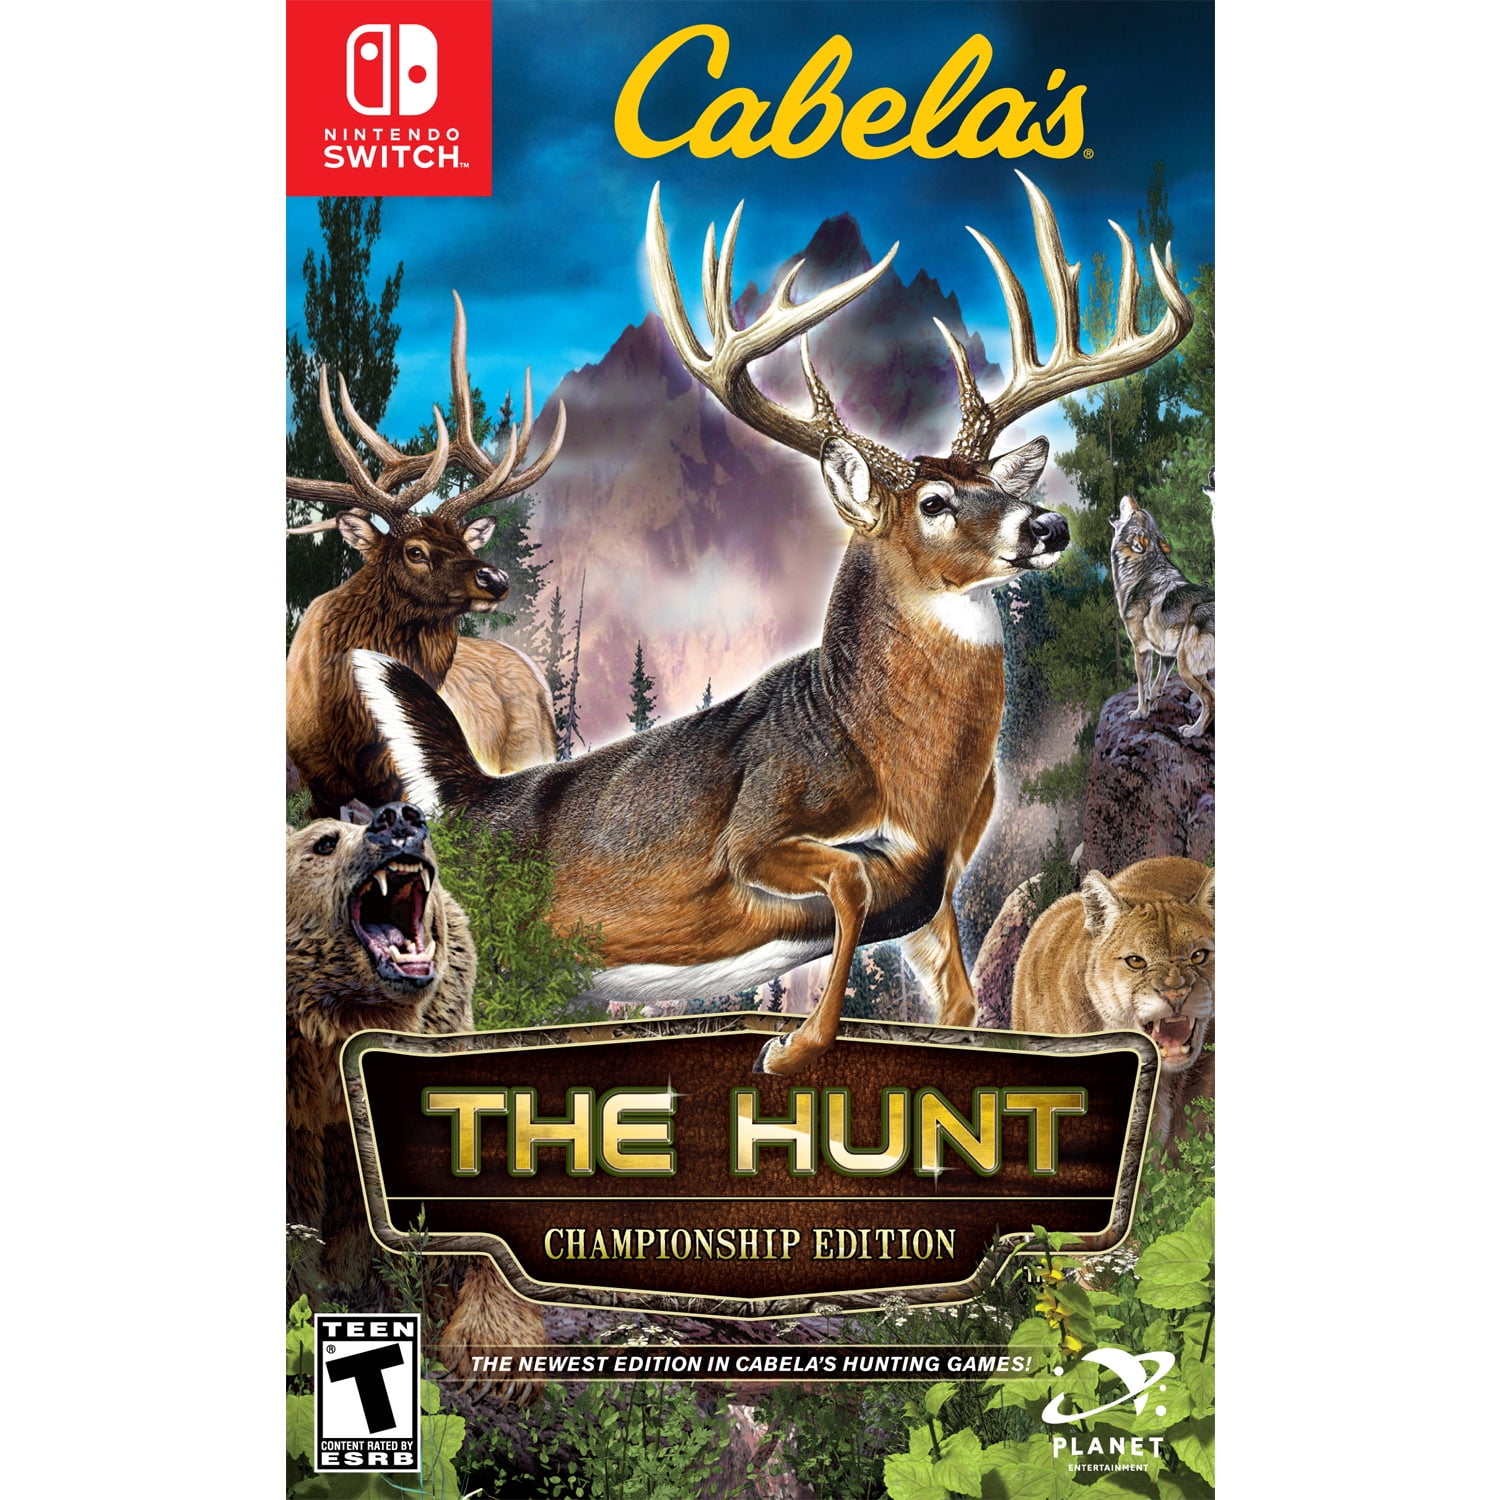 NEW BUCK HUNTER CALL OF THE WILD COMPACT FLASH CARD 